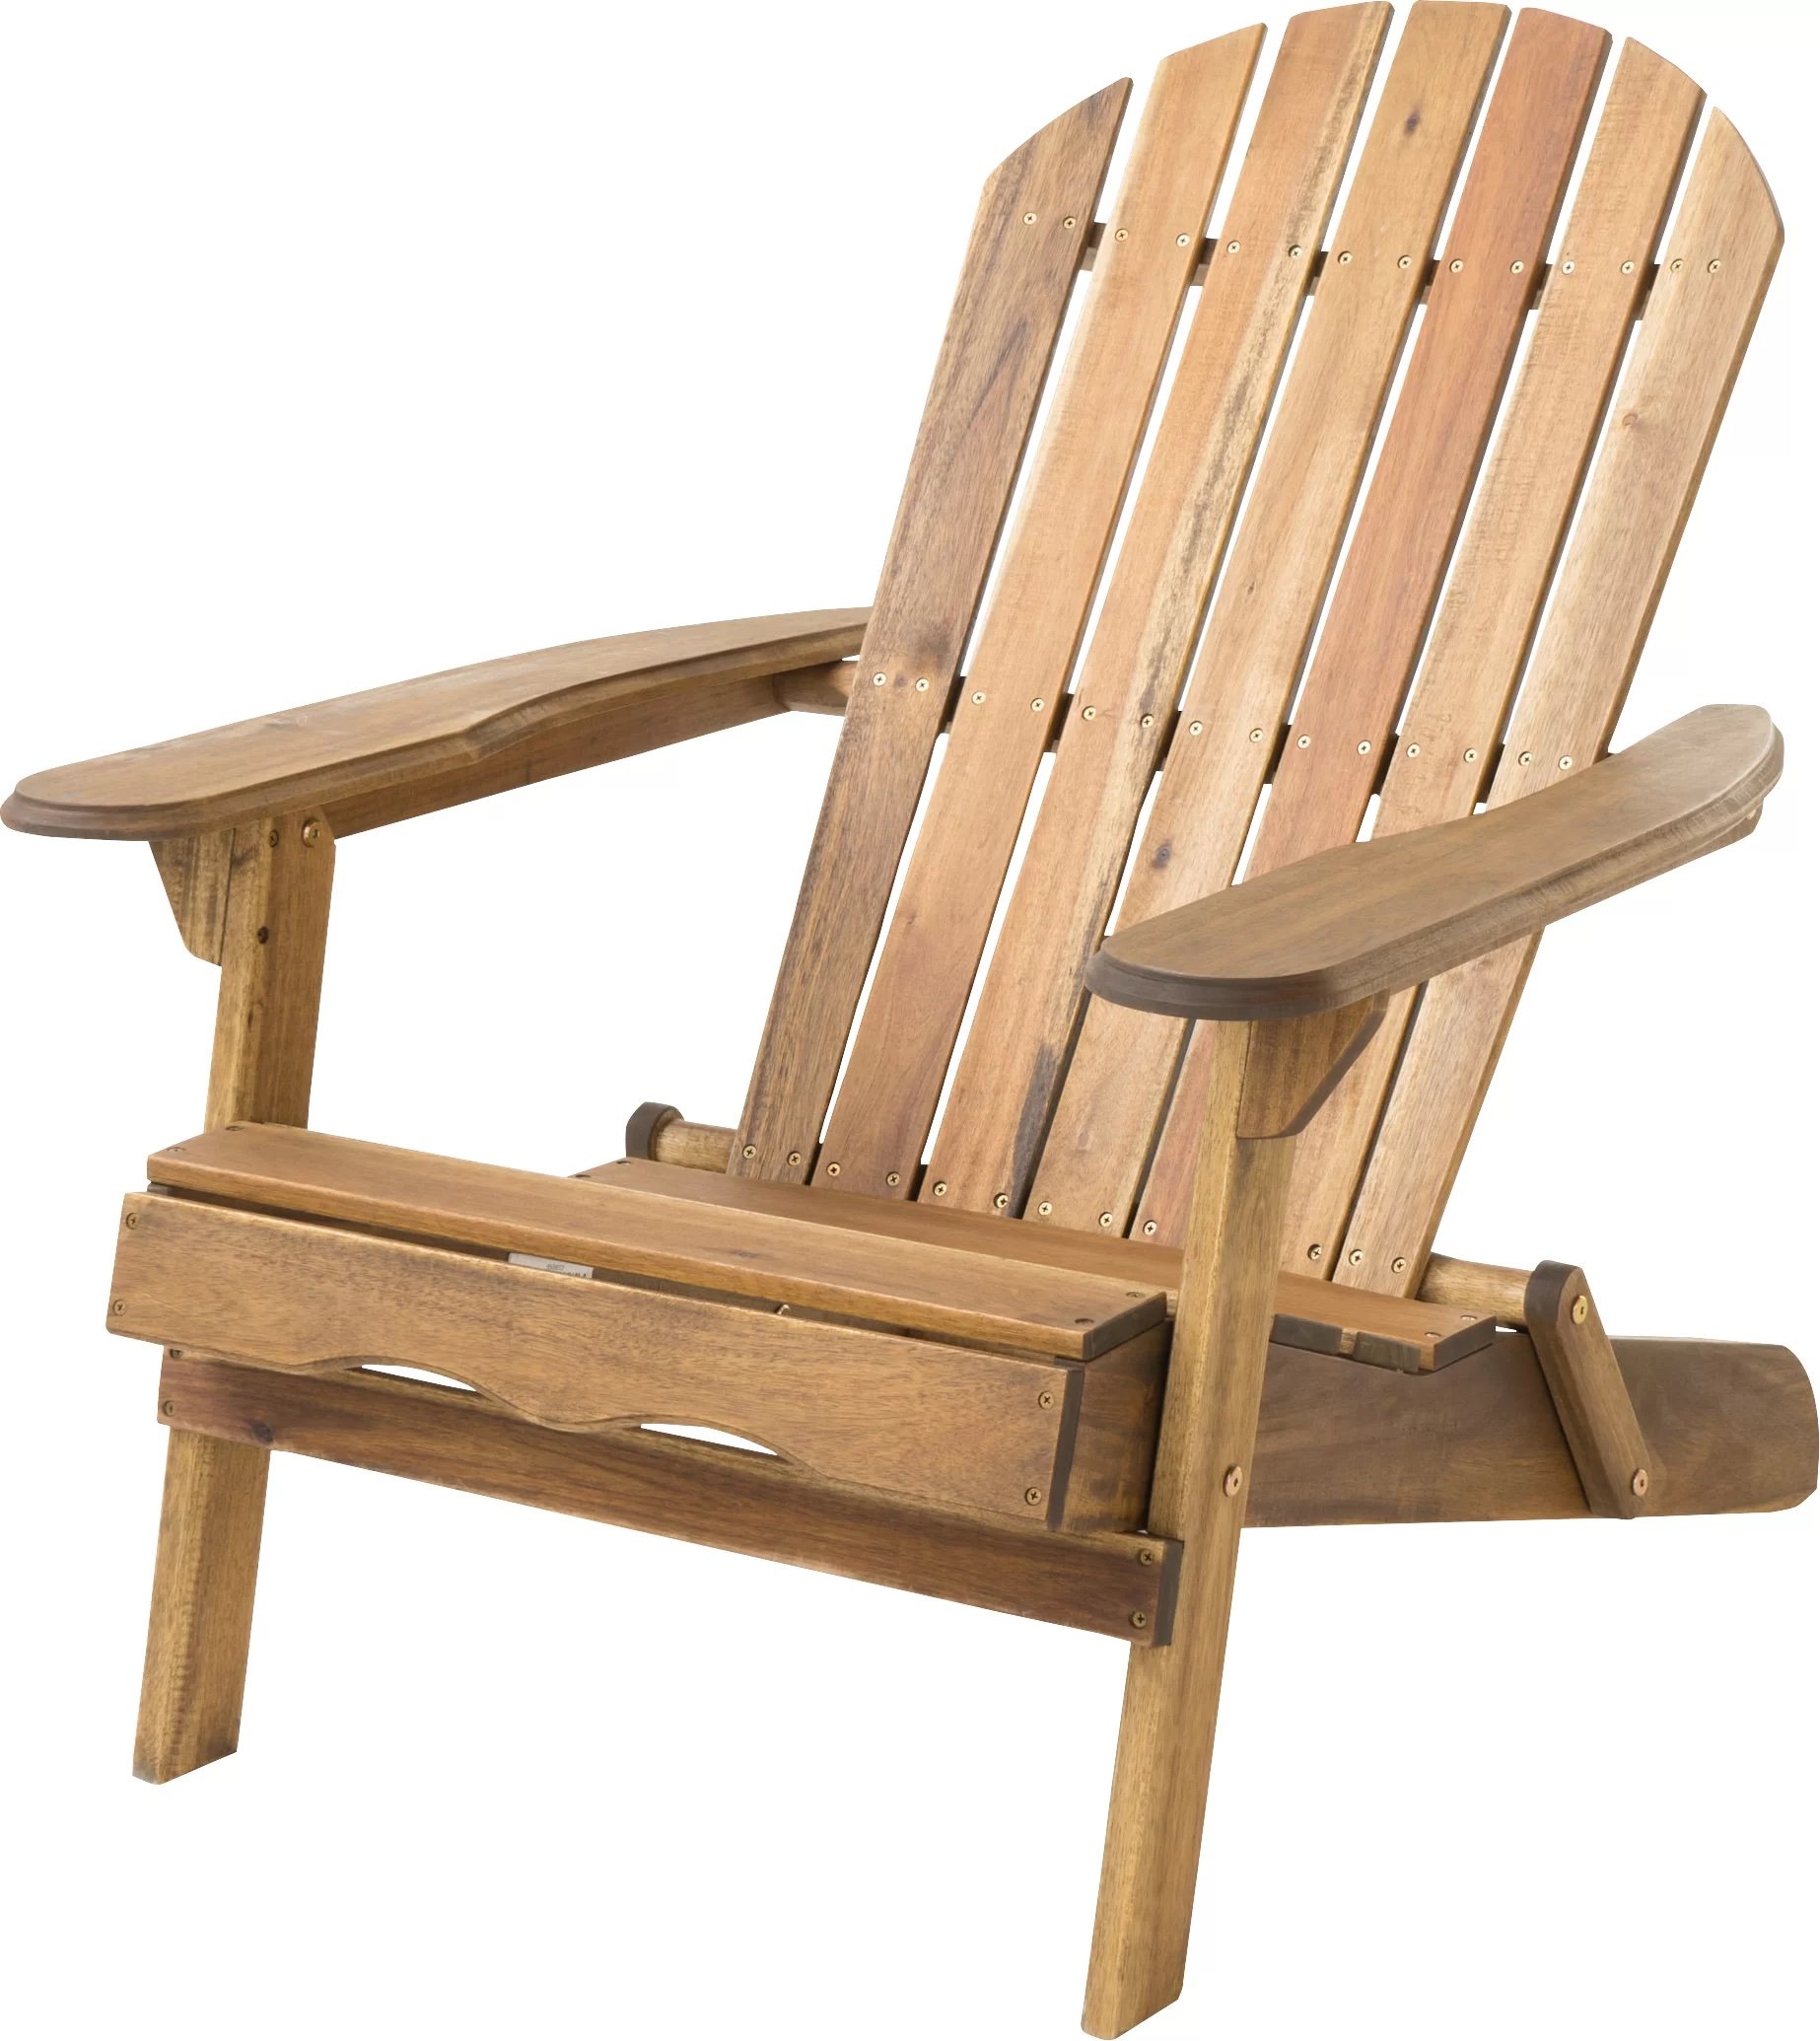 Traditional wooden adirondack chair with folding mechanism on back leg.